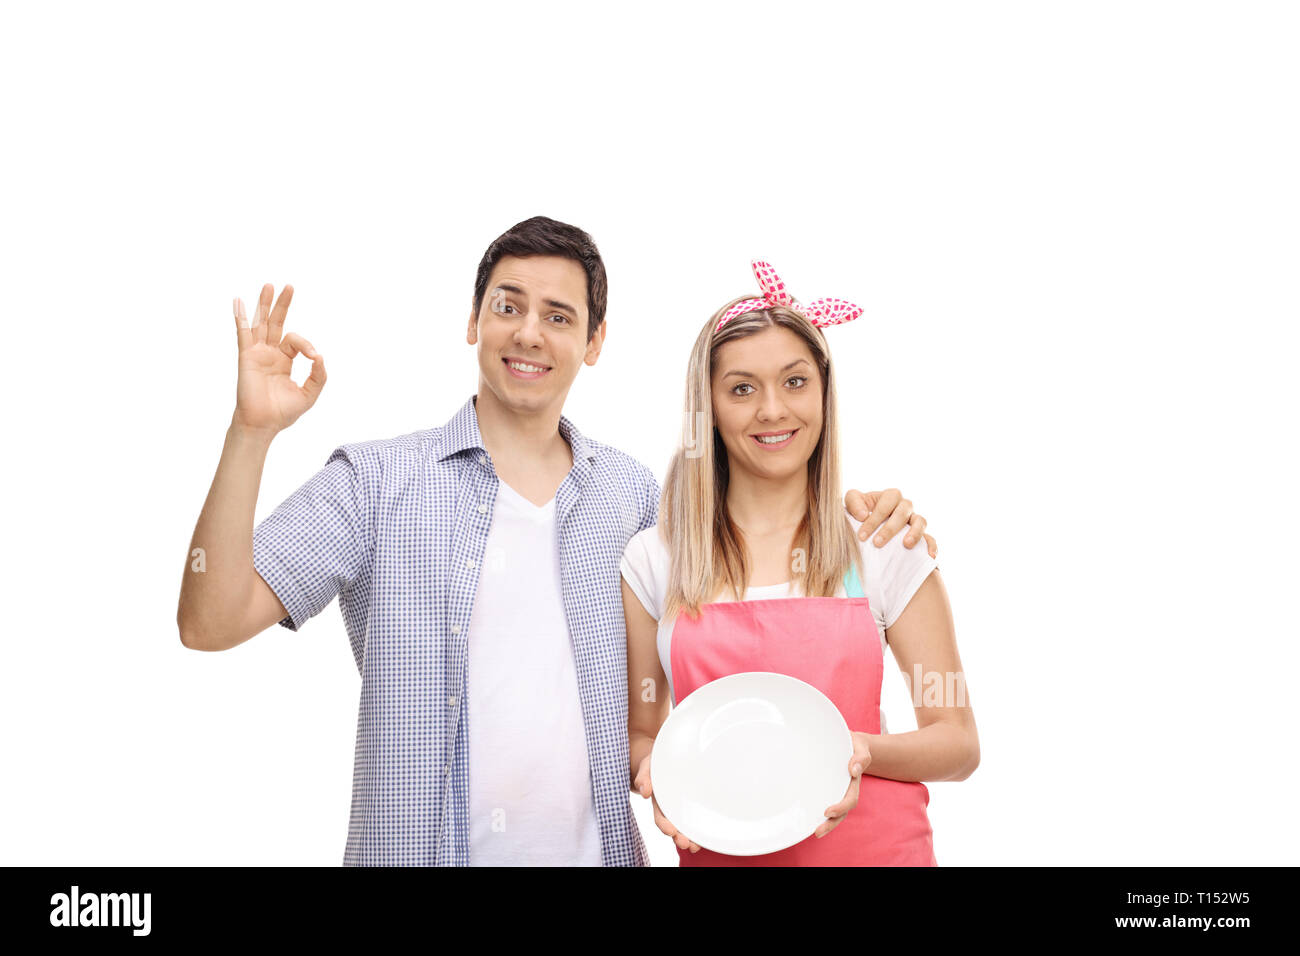 Young couple showing a clean plate isolated on white background Stock Photo